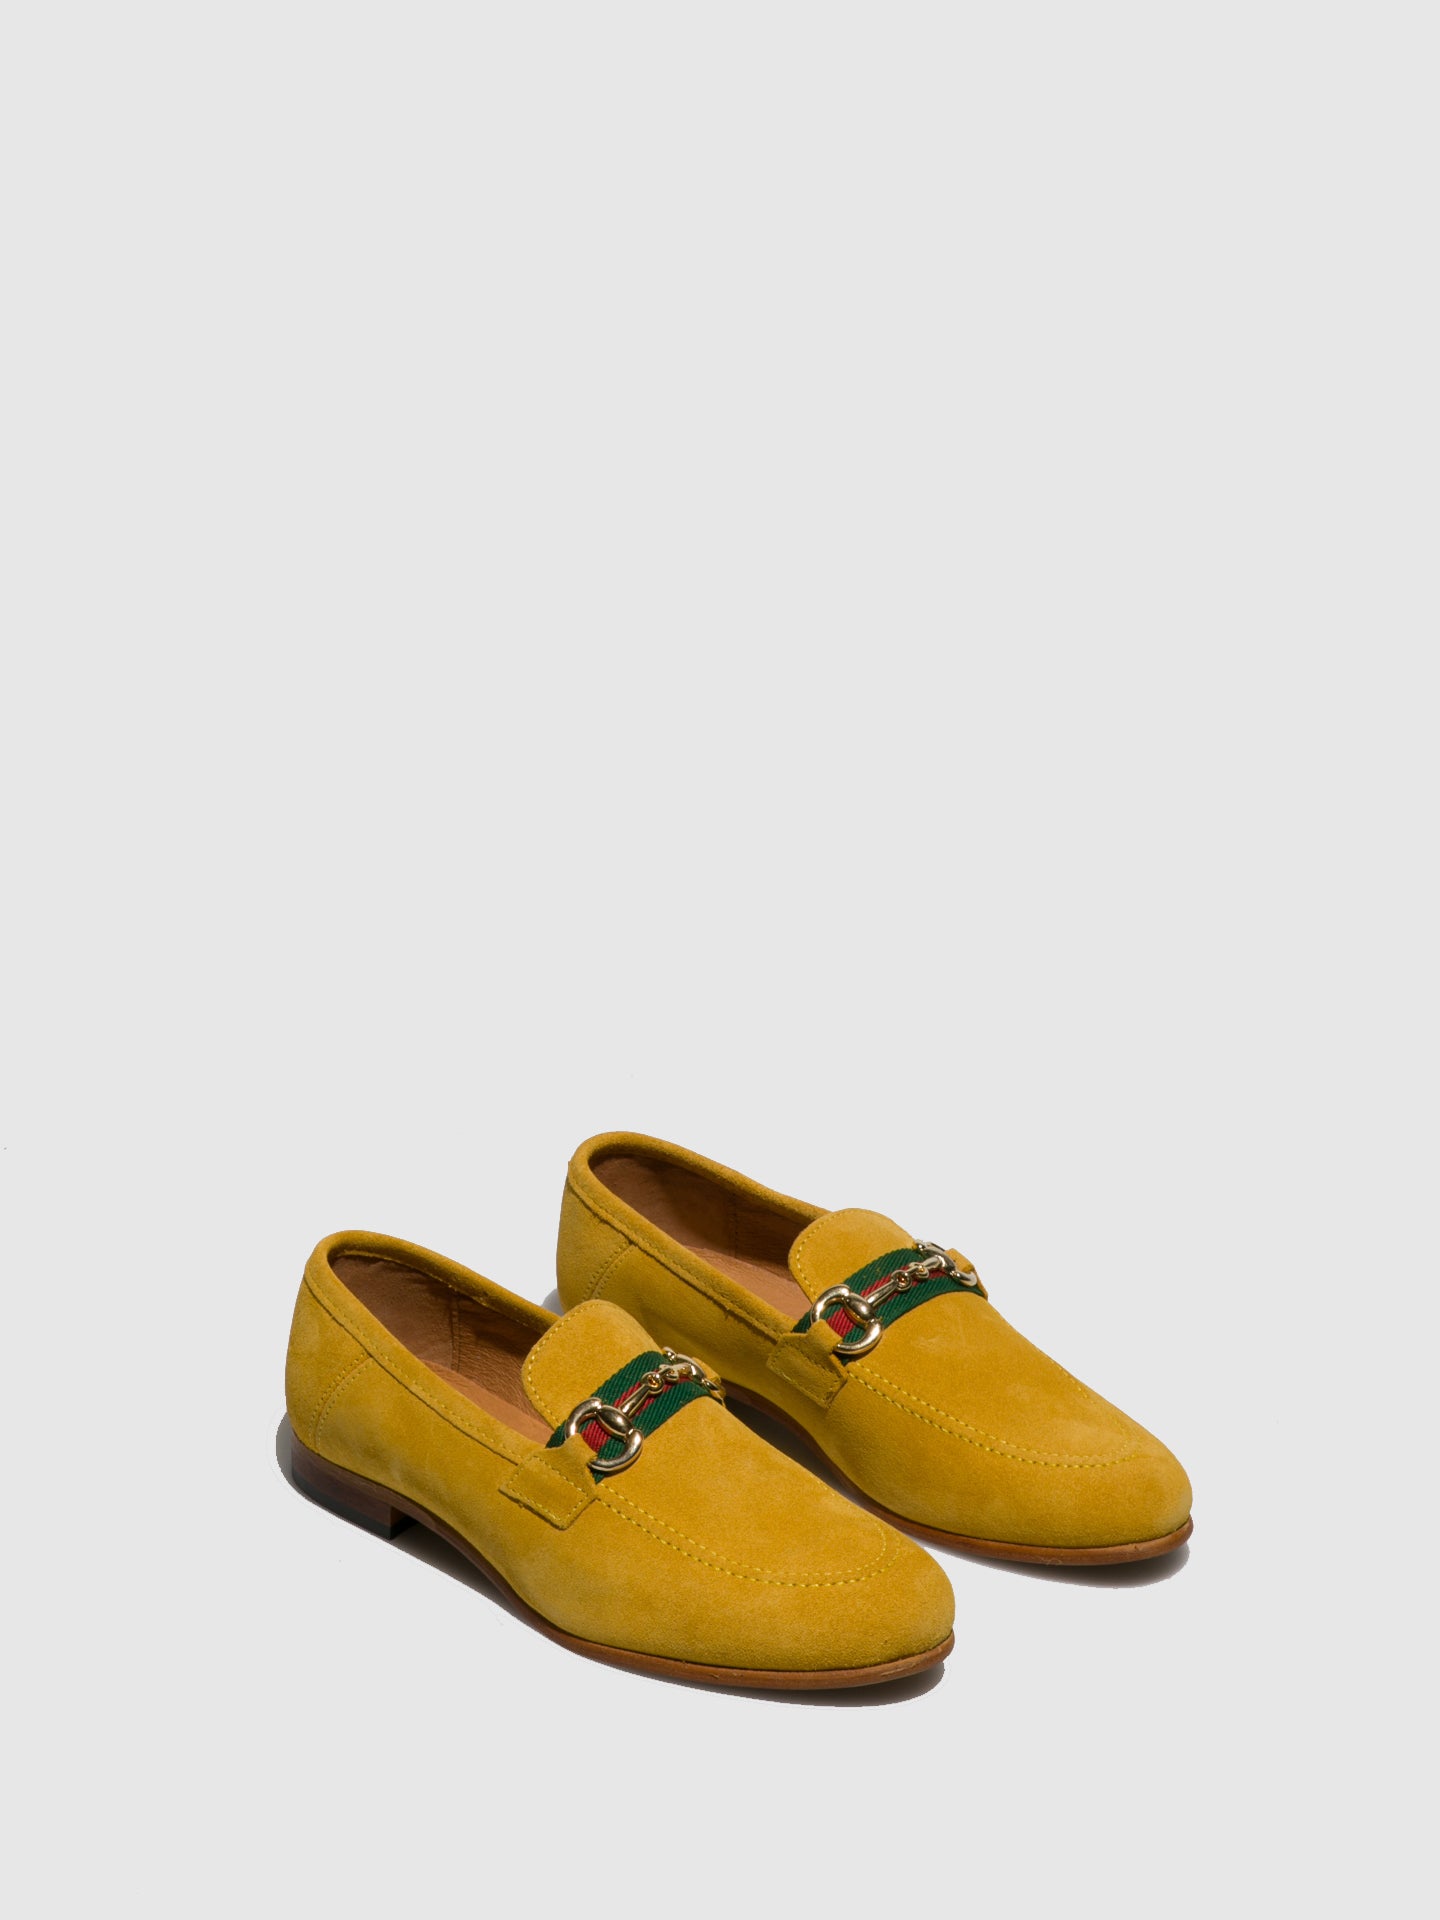 Foreva Yellow Leather Mocassins Shoes